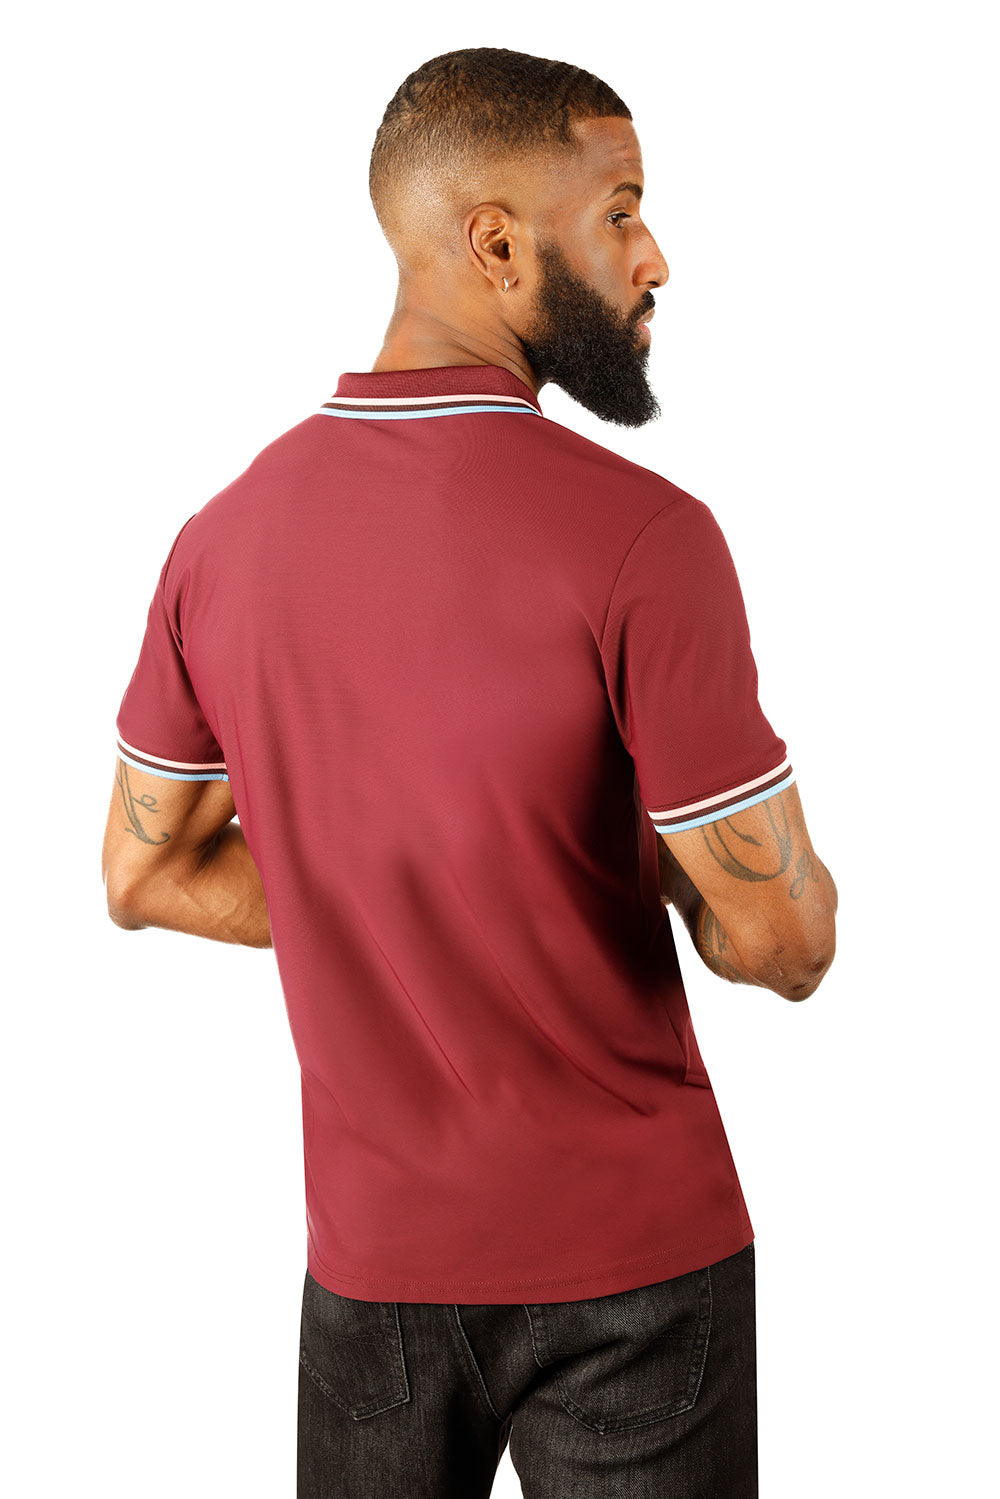 Barabas Men's Solid Color Linear Collar and Cuff Polo Shirts 3PS127 Burgundy